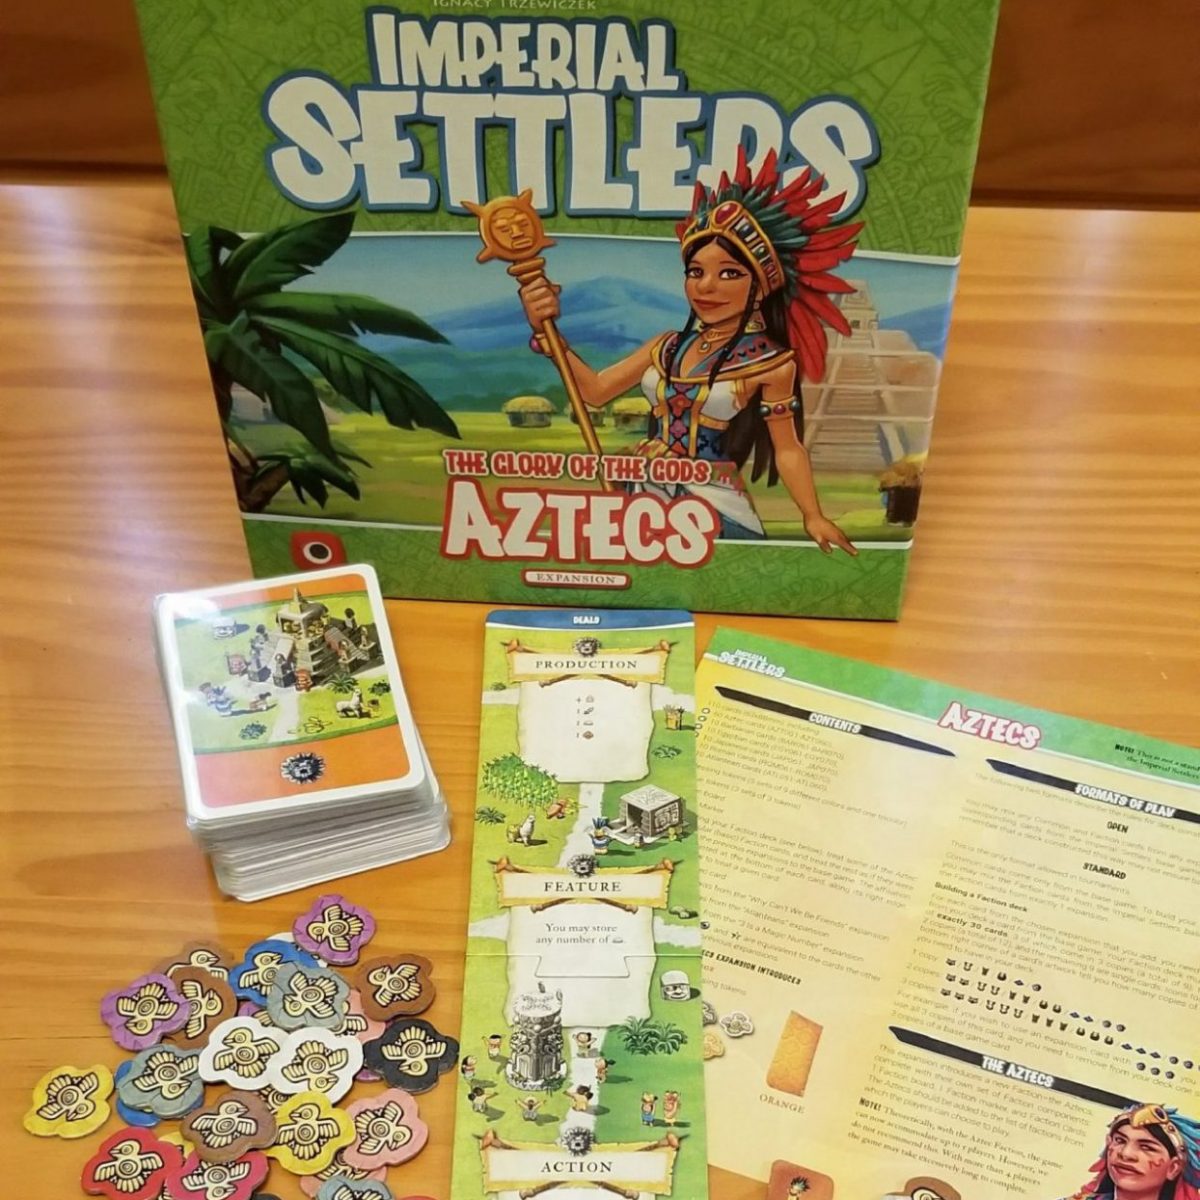 Imperial Settlers Review: The Aztecs Game Review — Meeple Mountain